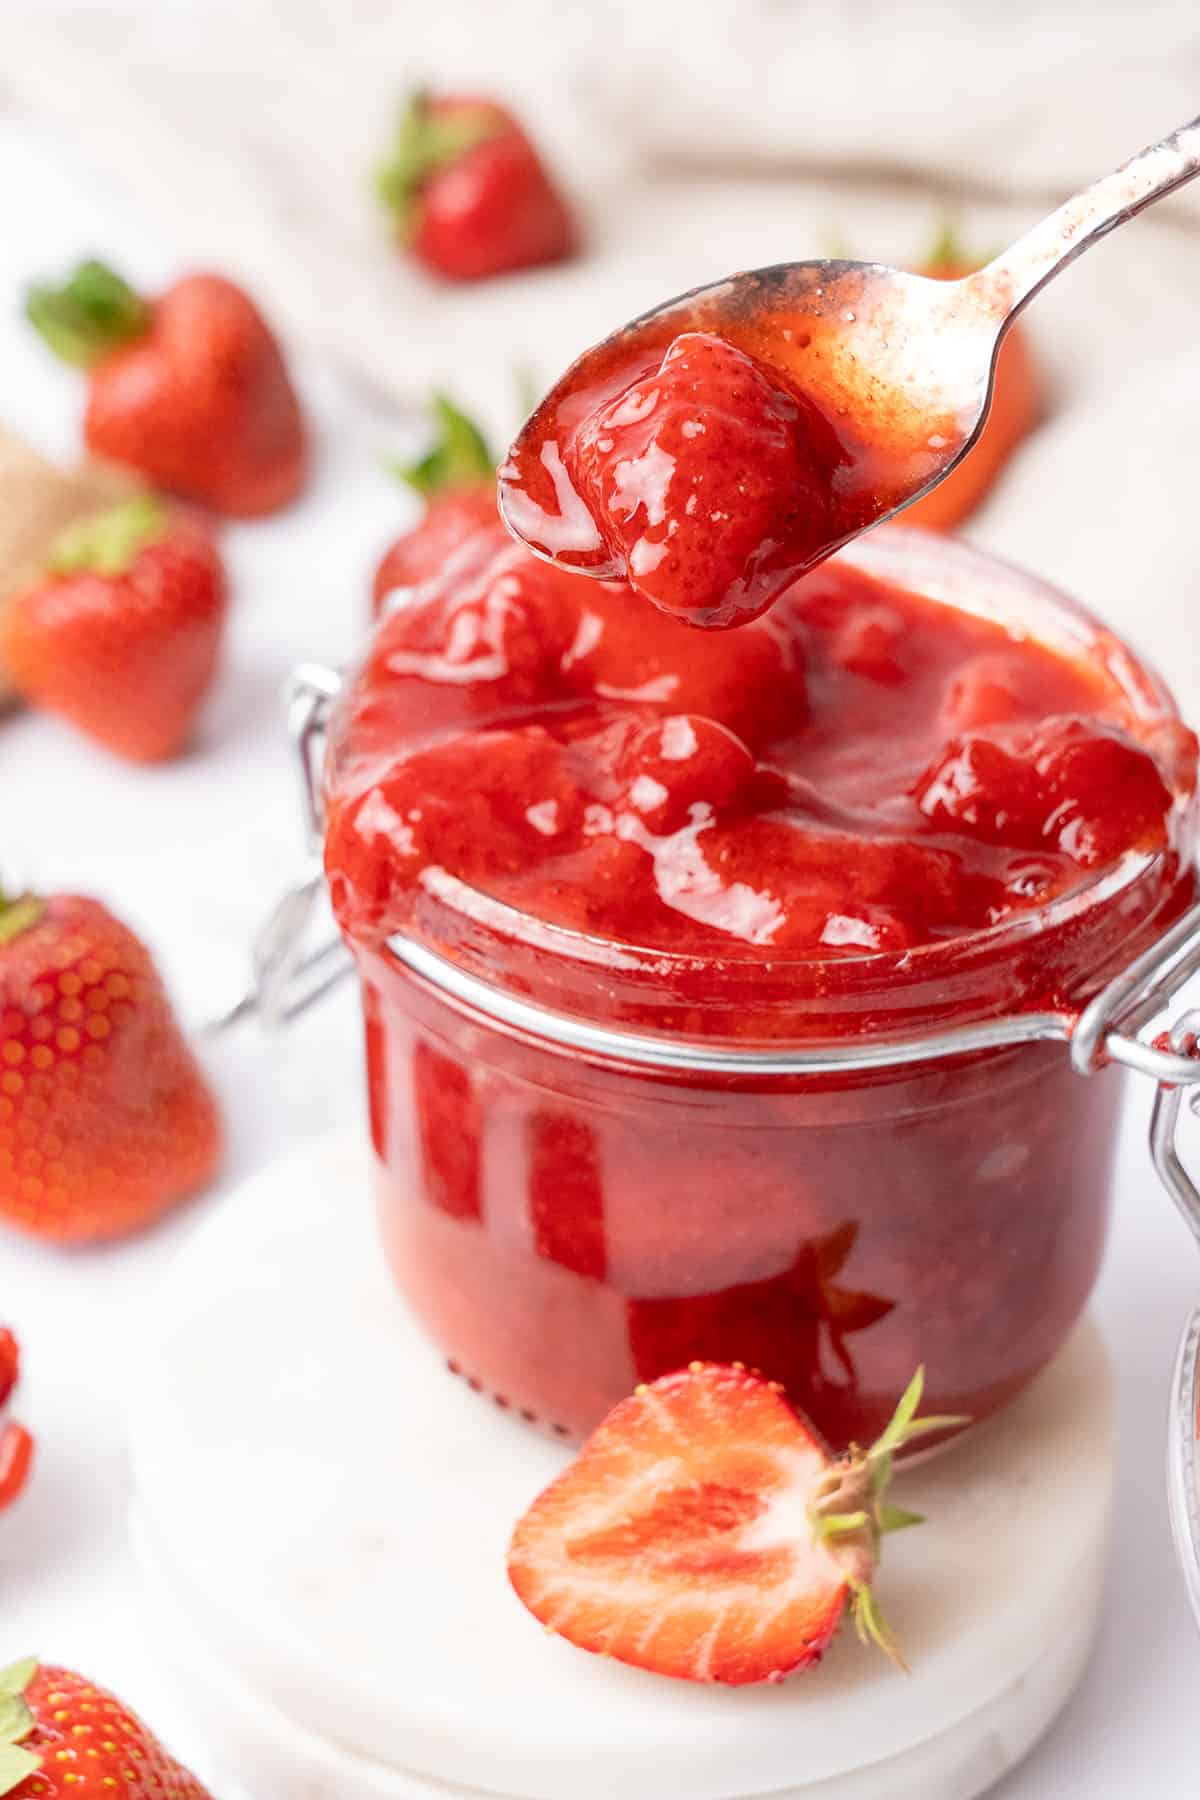 Strawberry Compote in a jar.